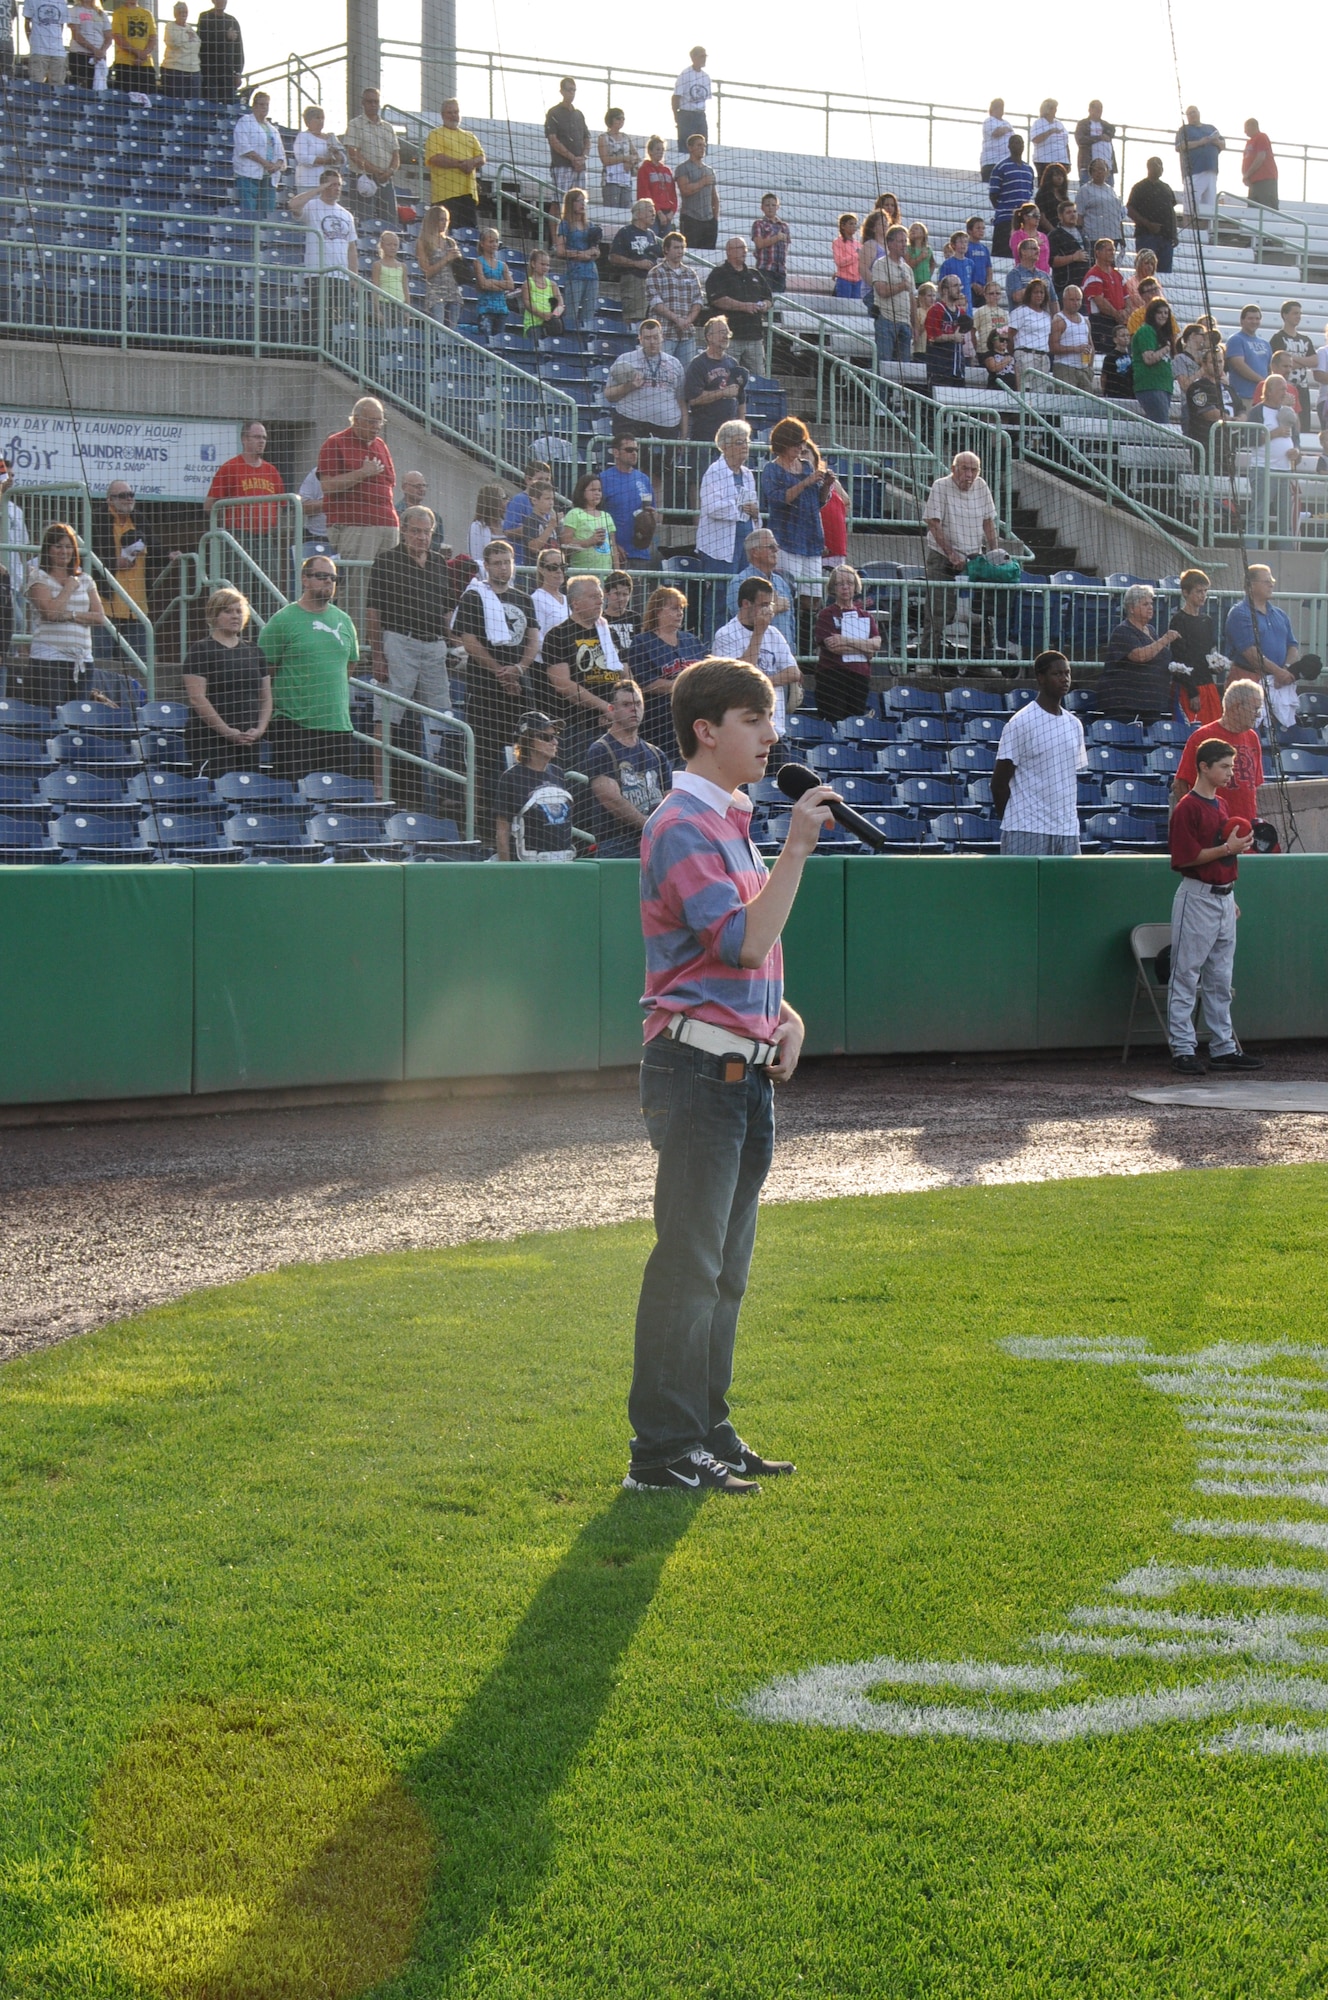 Eoin Rude, a senior at St Thomas Aquinas High School in Louisville, Ohio and son of Master Sgt. John Rude, Unit Training Manager for the 910th Airlift Wing’s 76th Aerial Port Squadron, sings the National Anthem during a minor league baseball game between the Cleveland Indians Class A affiliate Mahoning Valley Scrappers and the Lowell Spinners at Eastwood Field here, August 7, 2013. Nearly 200 Citizen Airmen along with their families, friends and co-workers were in attendance and representatives from the 910th, based at nearby Youngstown Air Reserve Station, Ohio, were involved in many game night activities. U.S. Air Force photo by Master Sgt. Bob Barko Jr.